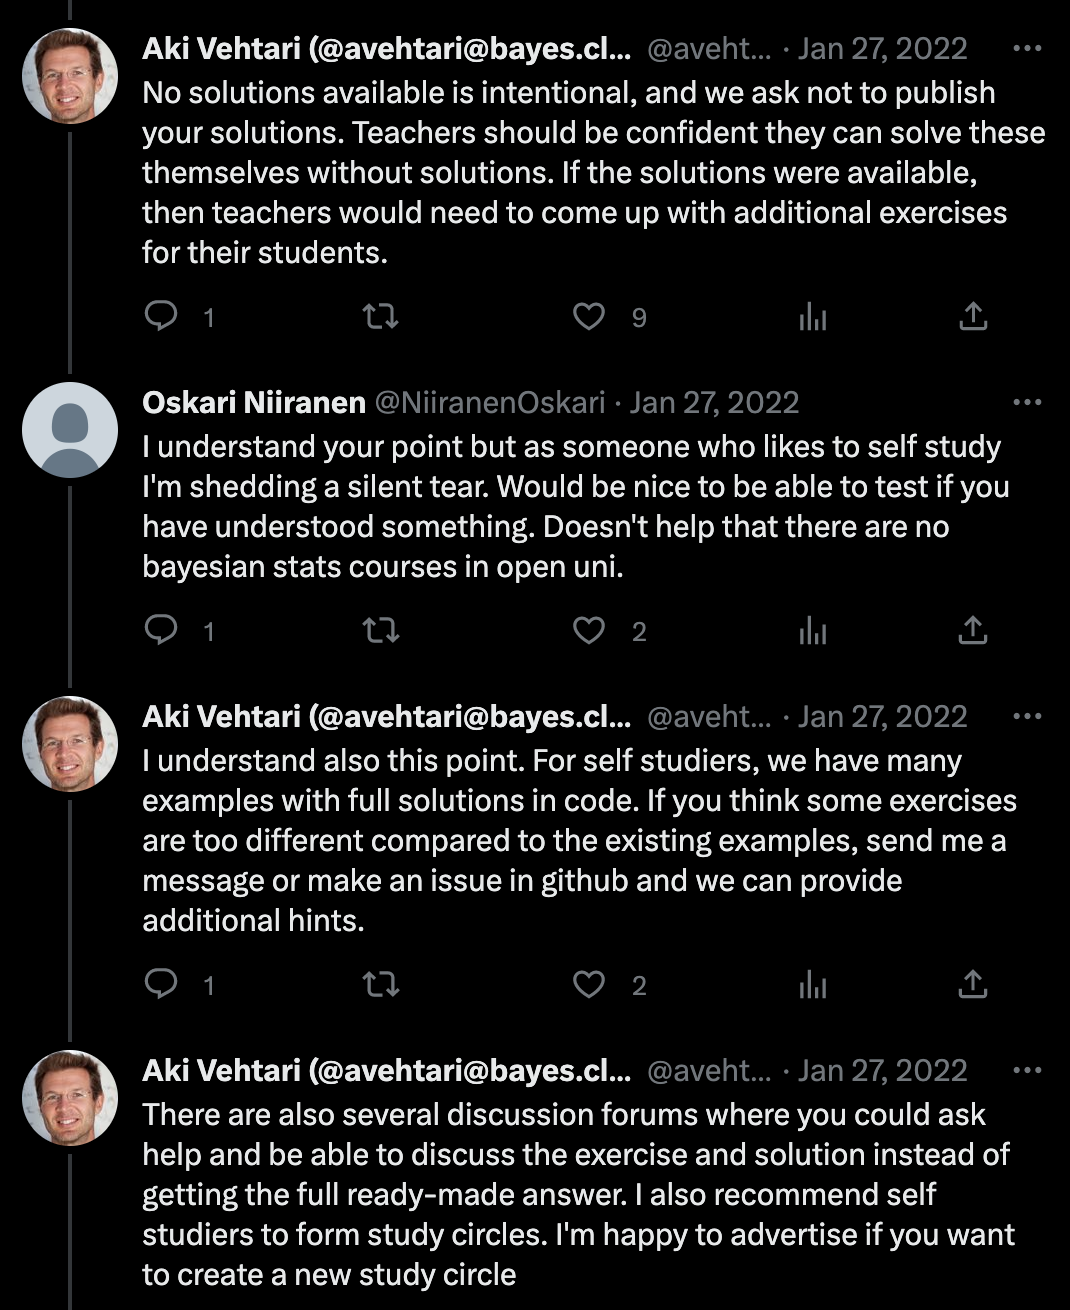 A tweet thread of Aki Vehtari explaining why they do not want solutions to the exercises published.